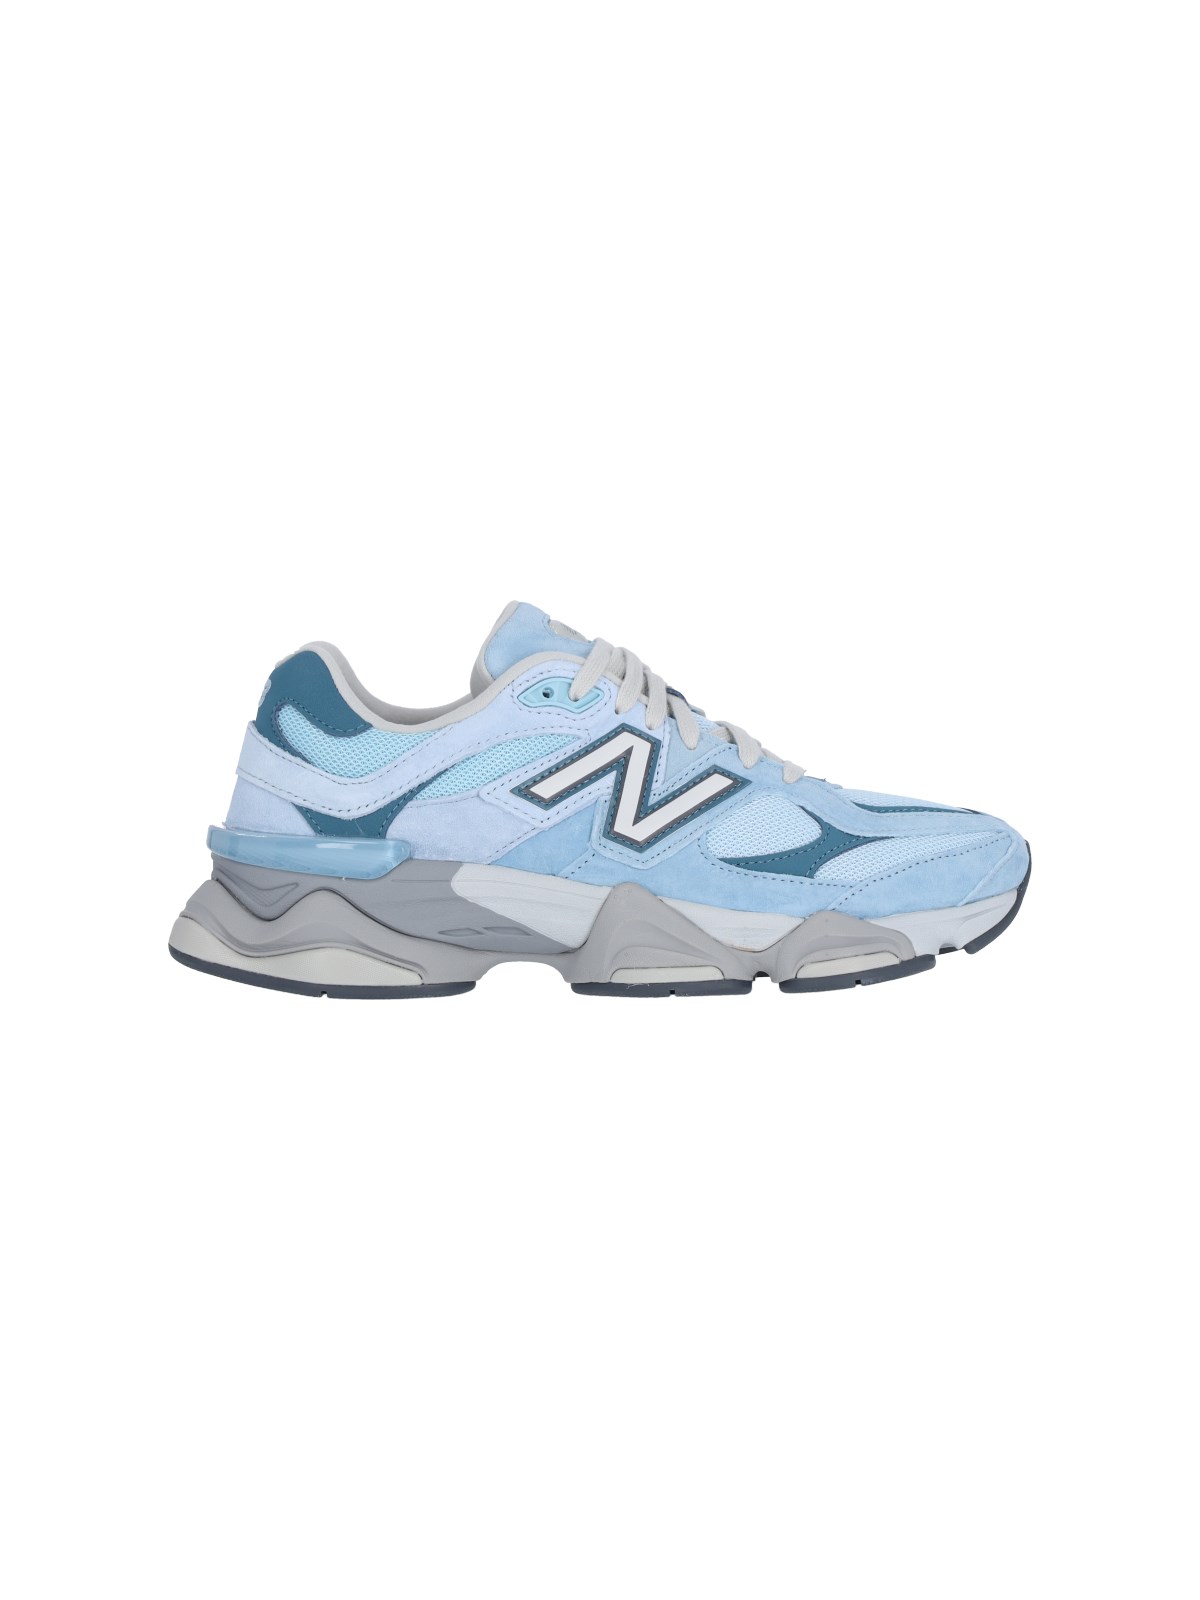 New Balance "9060" Sneakers In Light Blue